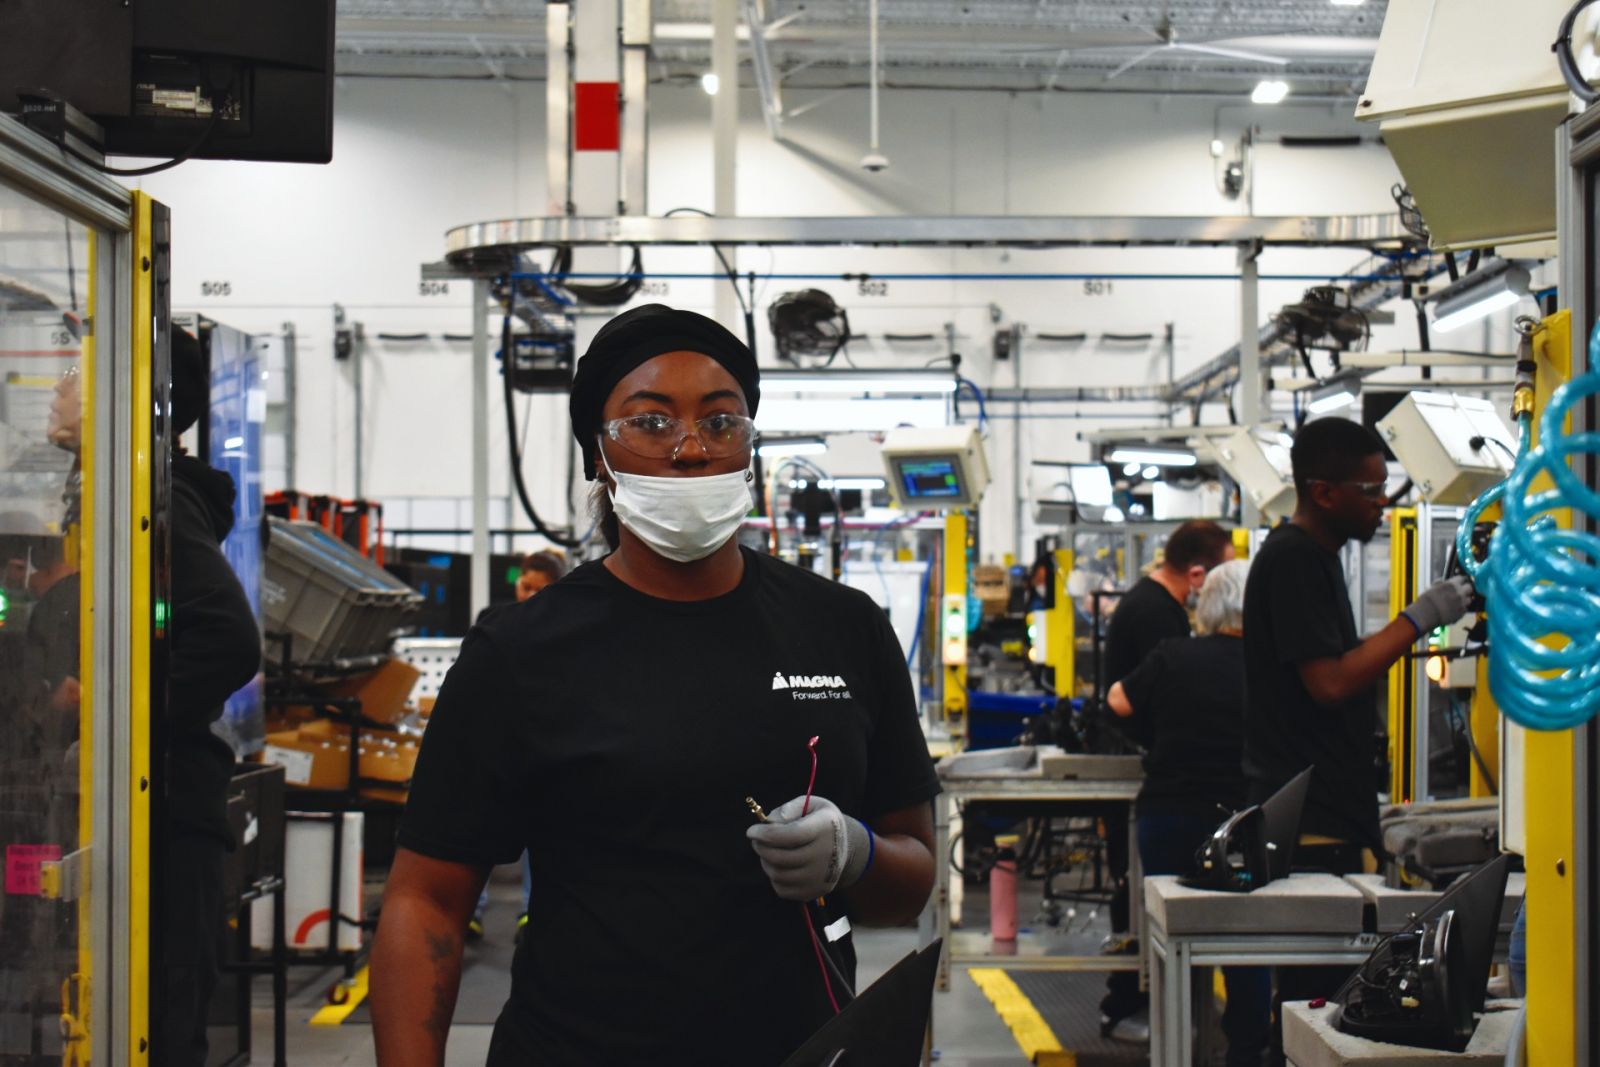 Employees at Magna Mirrors assemble mirrors for the automotive industry at an updated plant in Duncan, designed with a balance of automation and human talent in mind. (Photo/Molly Hulsey)